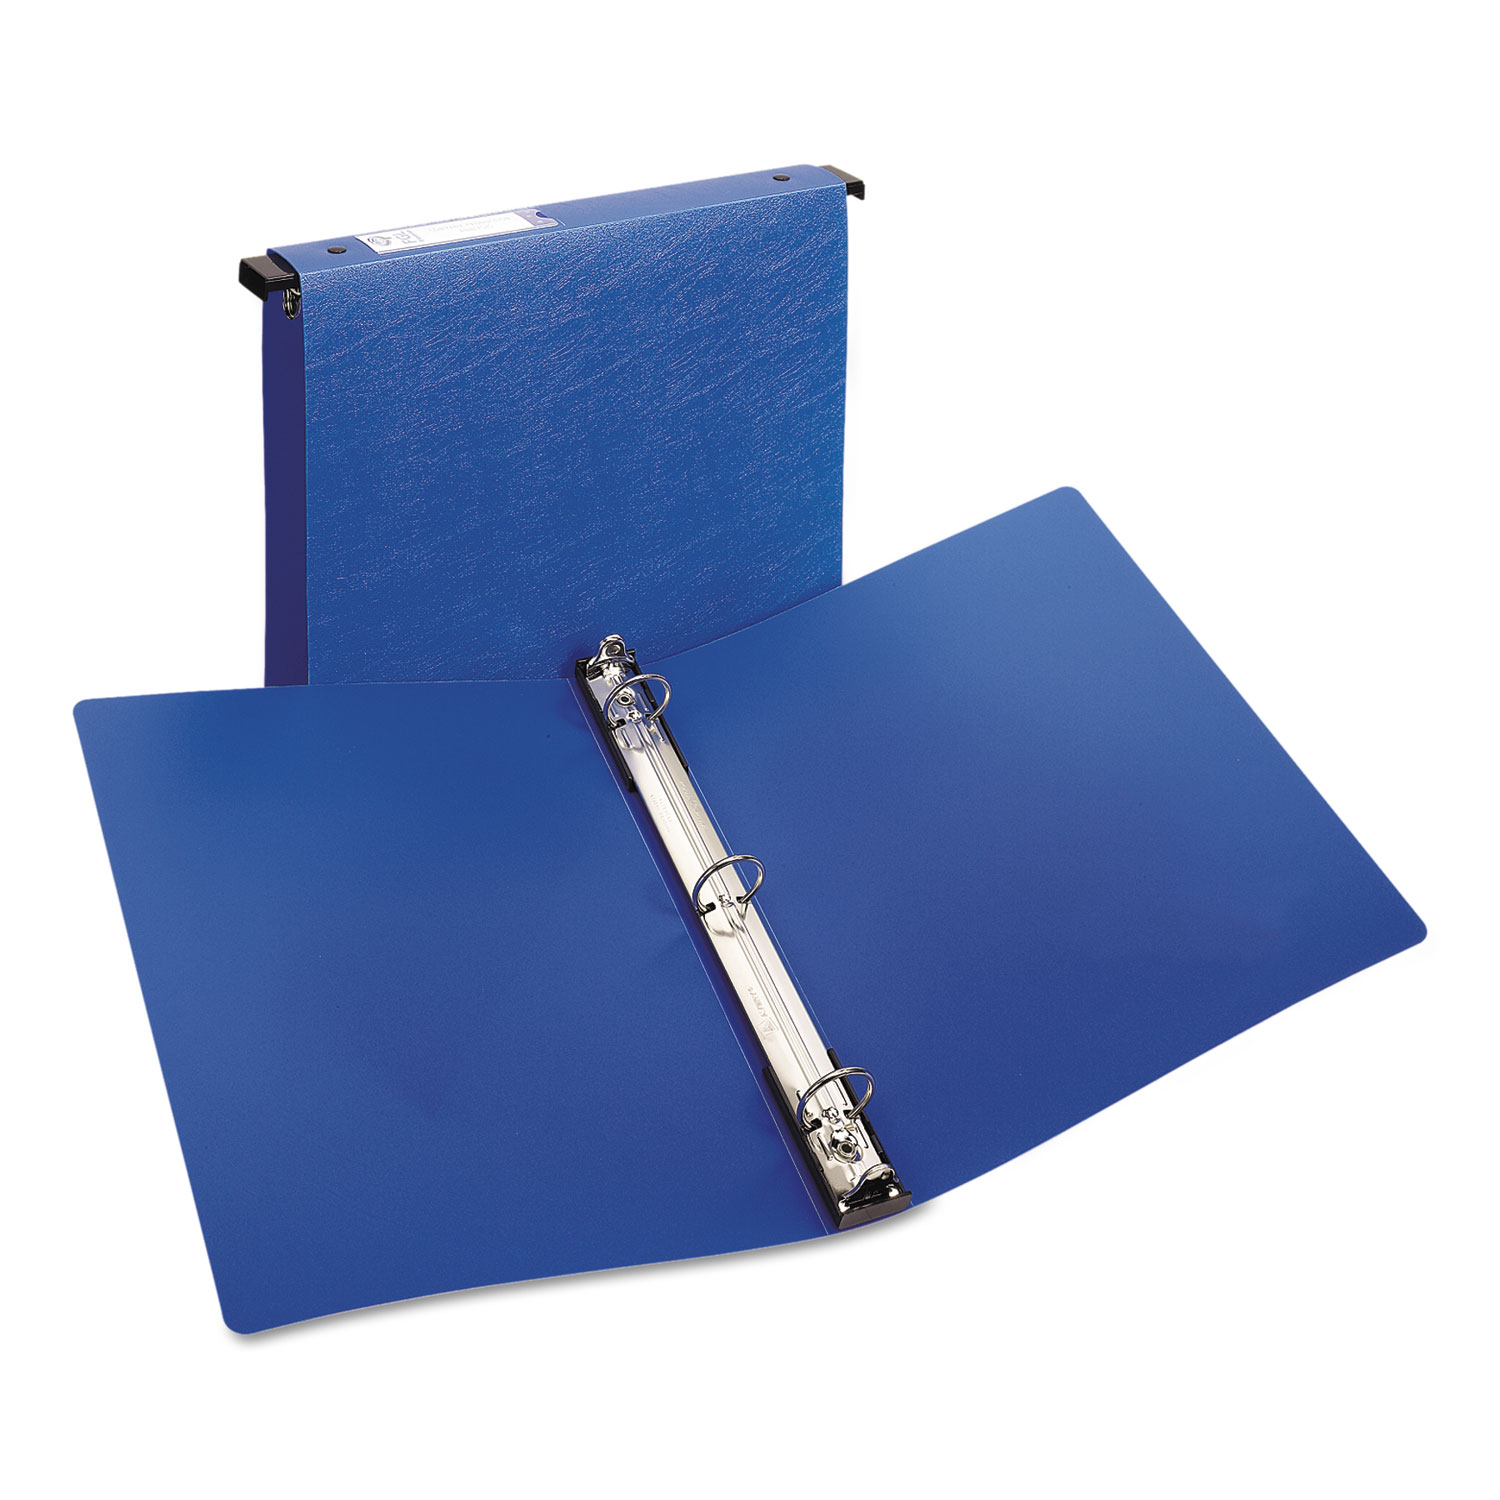  Avery 14800 Hanging Storage Flexible Non-View Binder with Round Rings, 3 Rings, 1 Capacity, 11 x 8.5, Blue (AVE14800) 